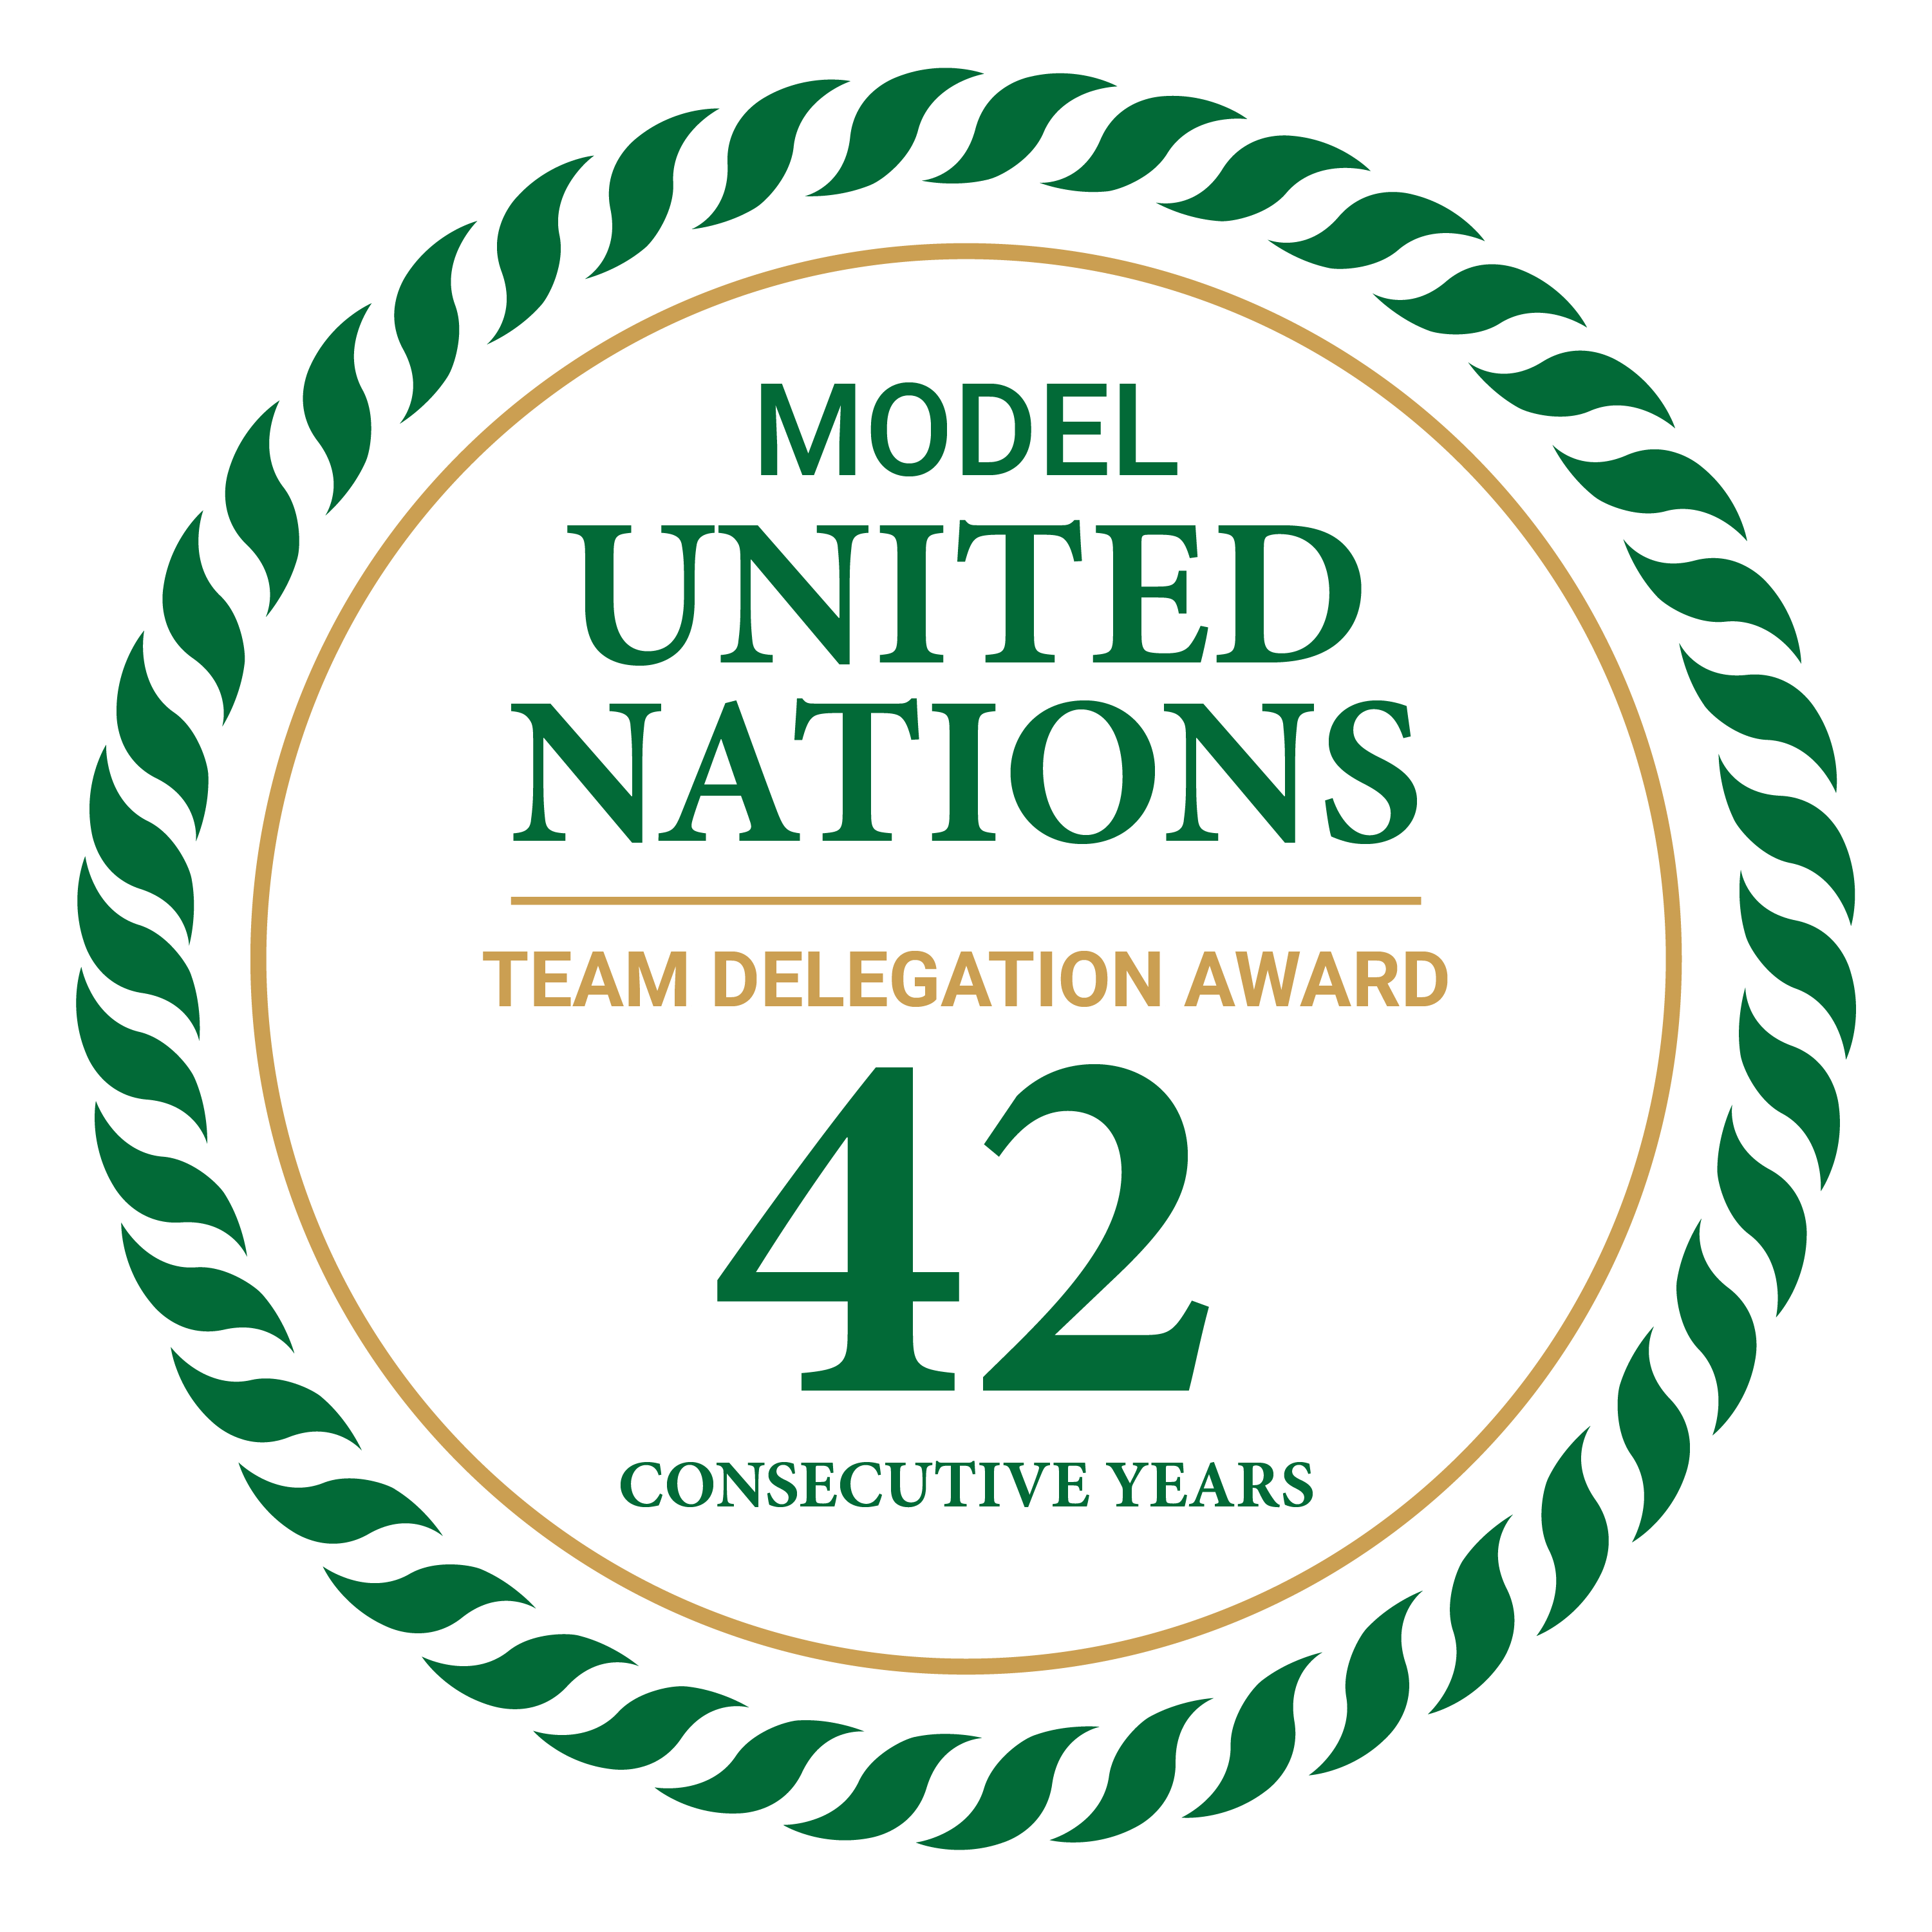 badge for model united nations team delegation award 42 consecutive years